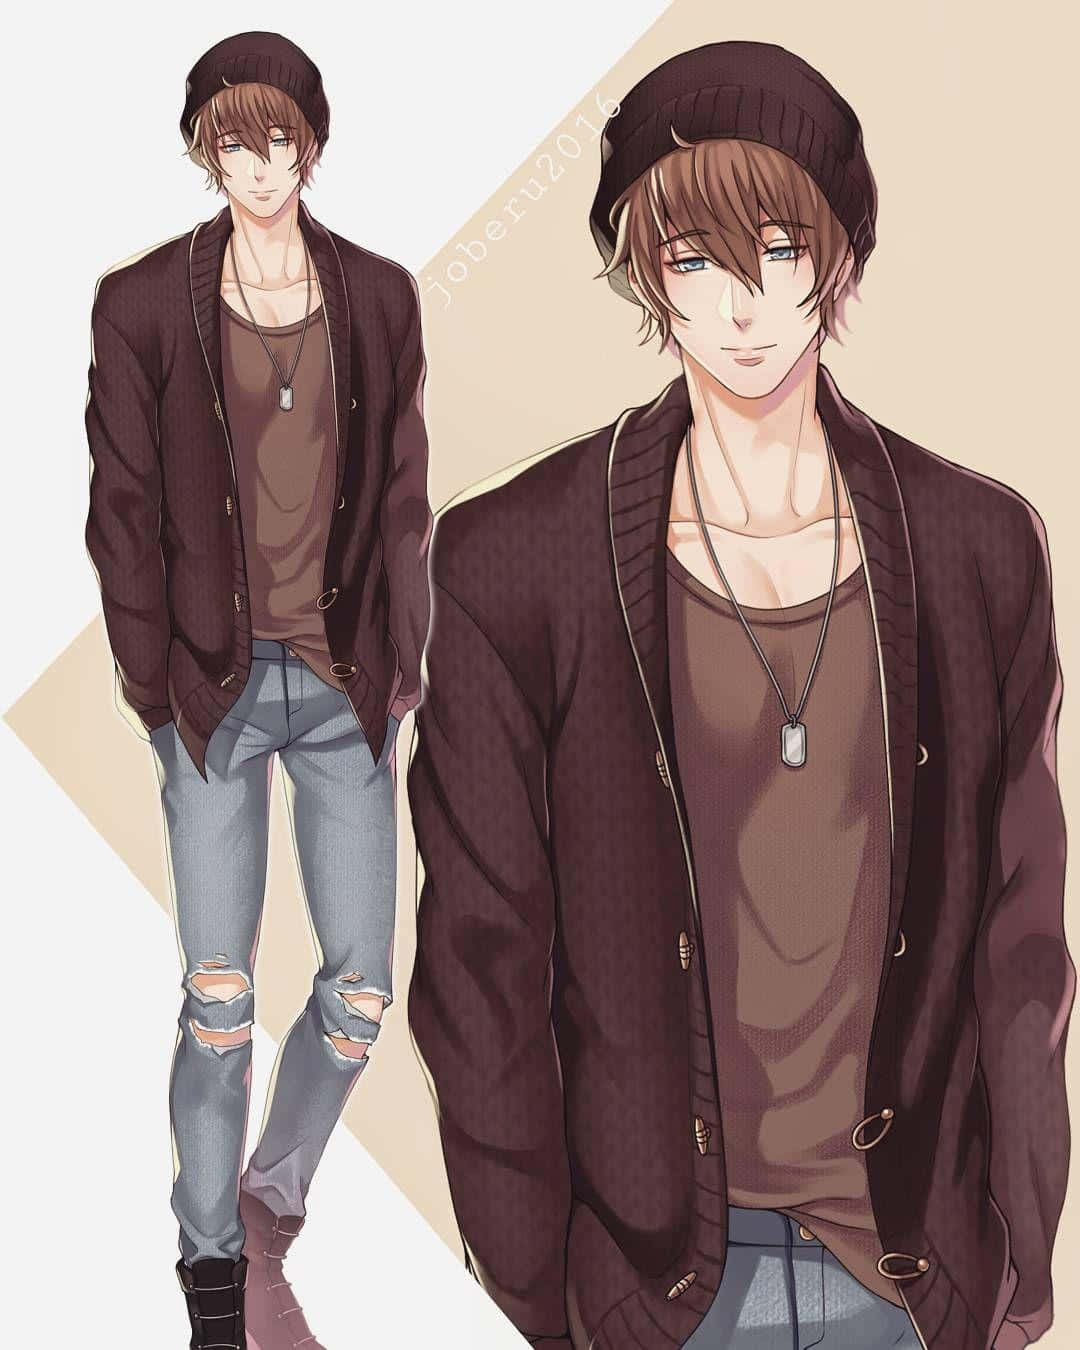 A Male Anime Character In A Brown Jacket And Jeans Wallpaper